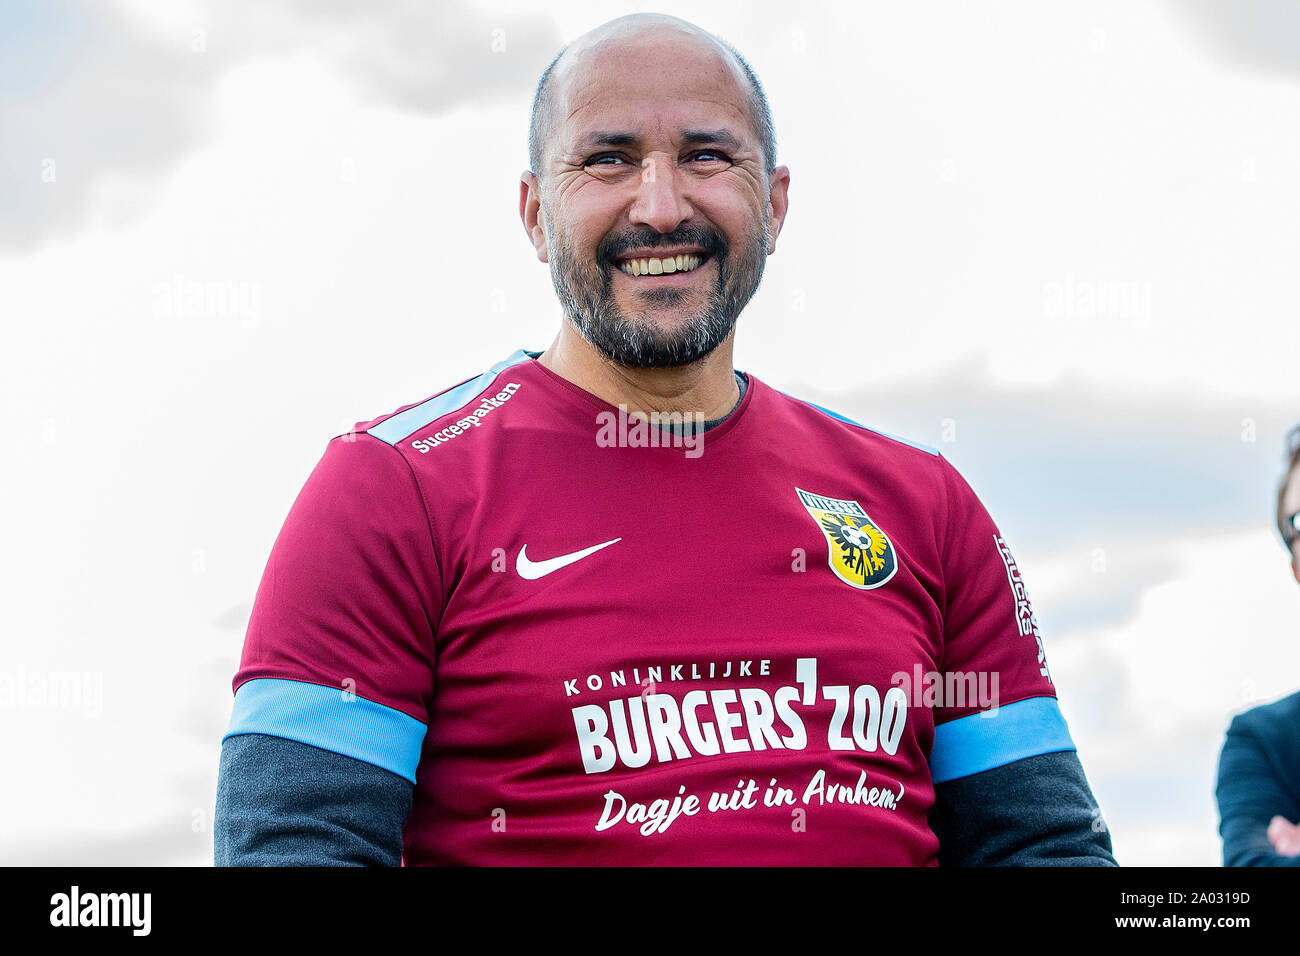 GROESBEEK 19-09-2019, dutchnews, mayor of Arnhem Ahmed Marcouch after his parachute jump in Vitesse Airborne jersey as part of 75th Airborne remembrance Stock Photo